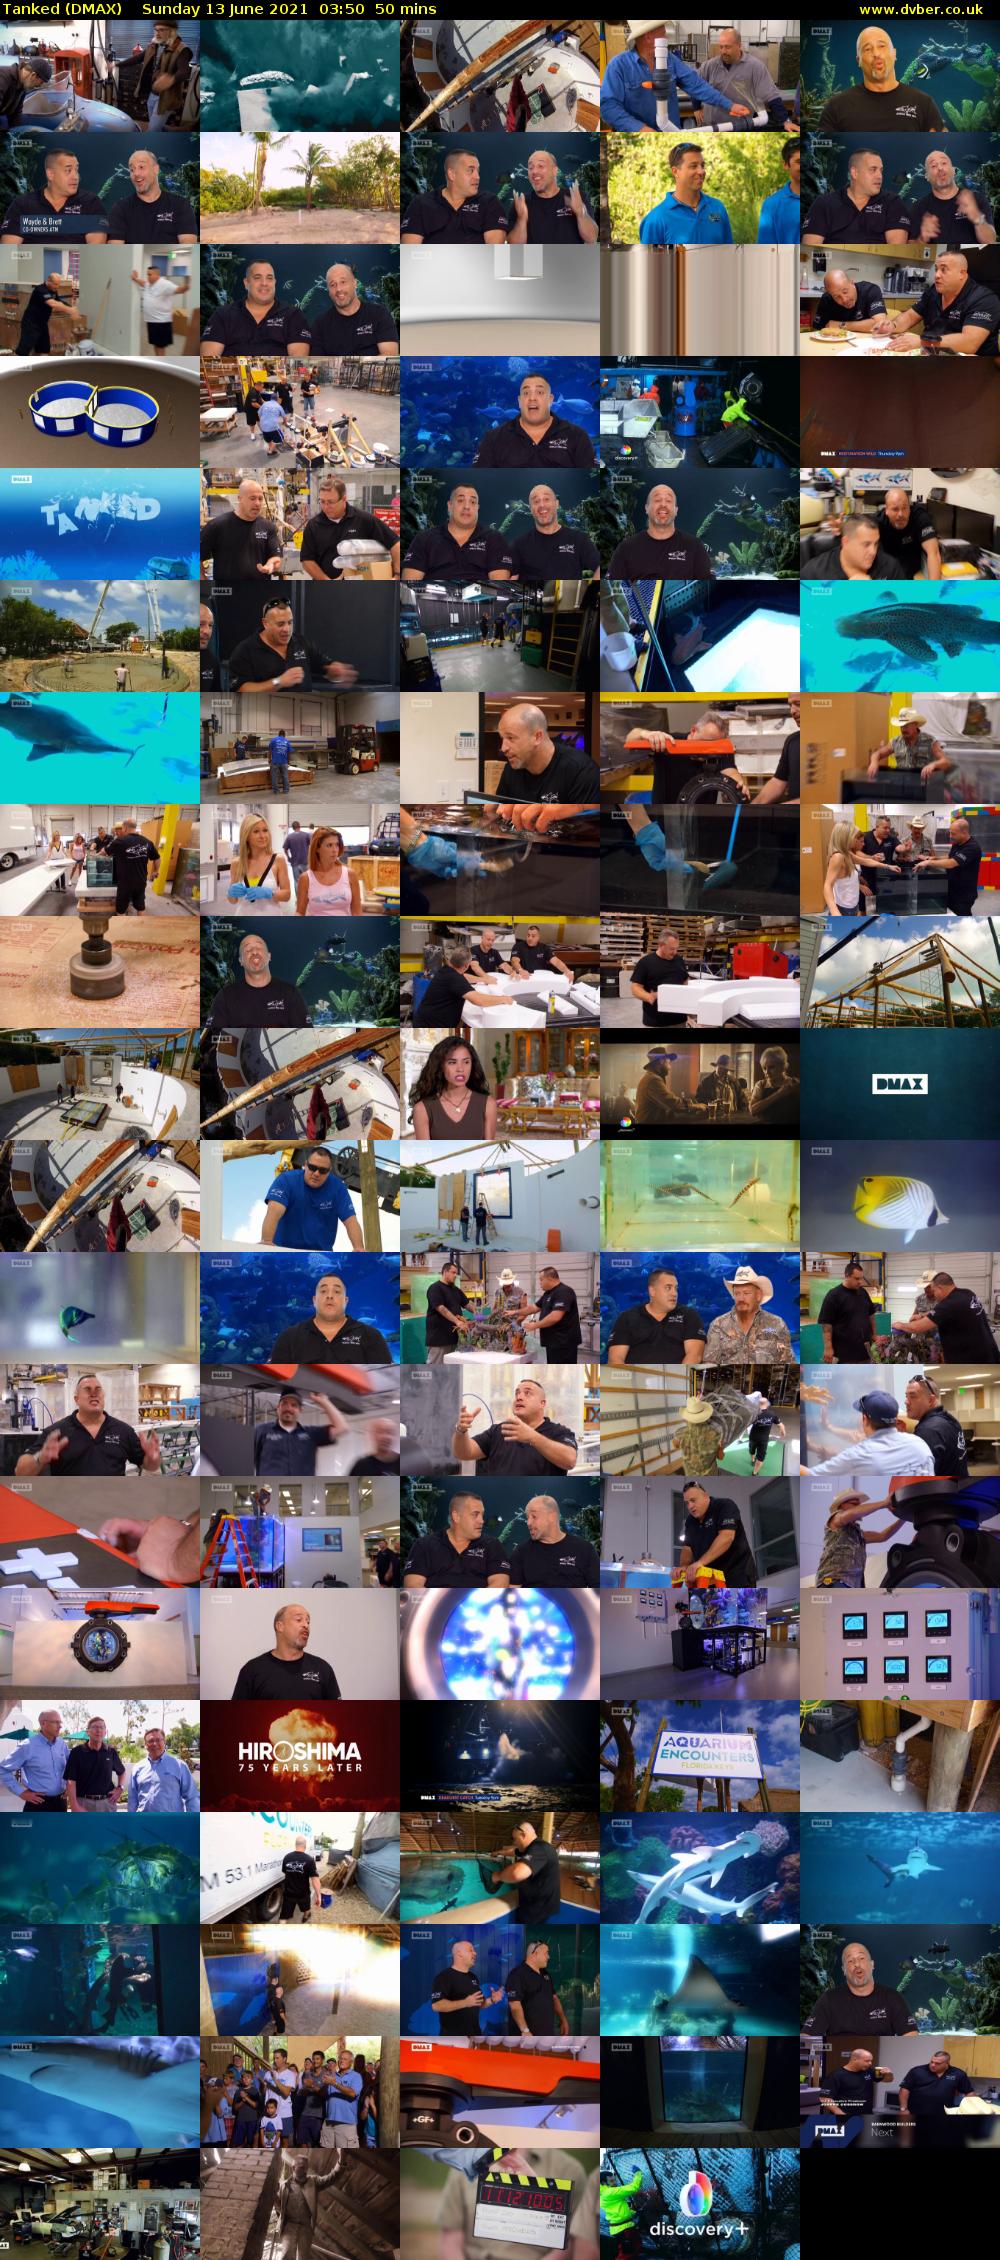 Tanked (DMAX) Sunday 13 June 2021 03:50 - 04:40